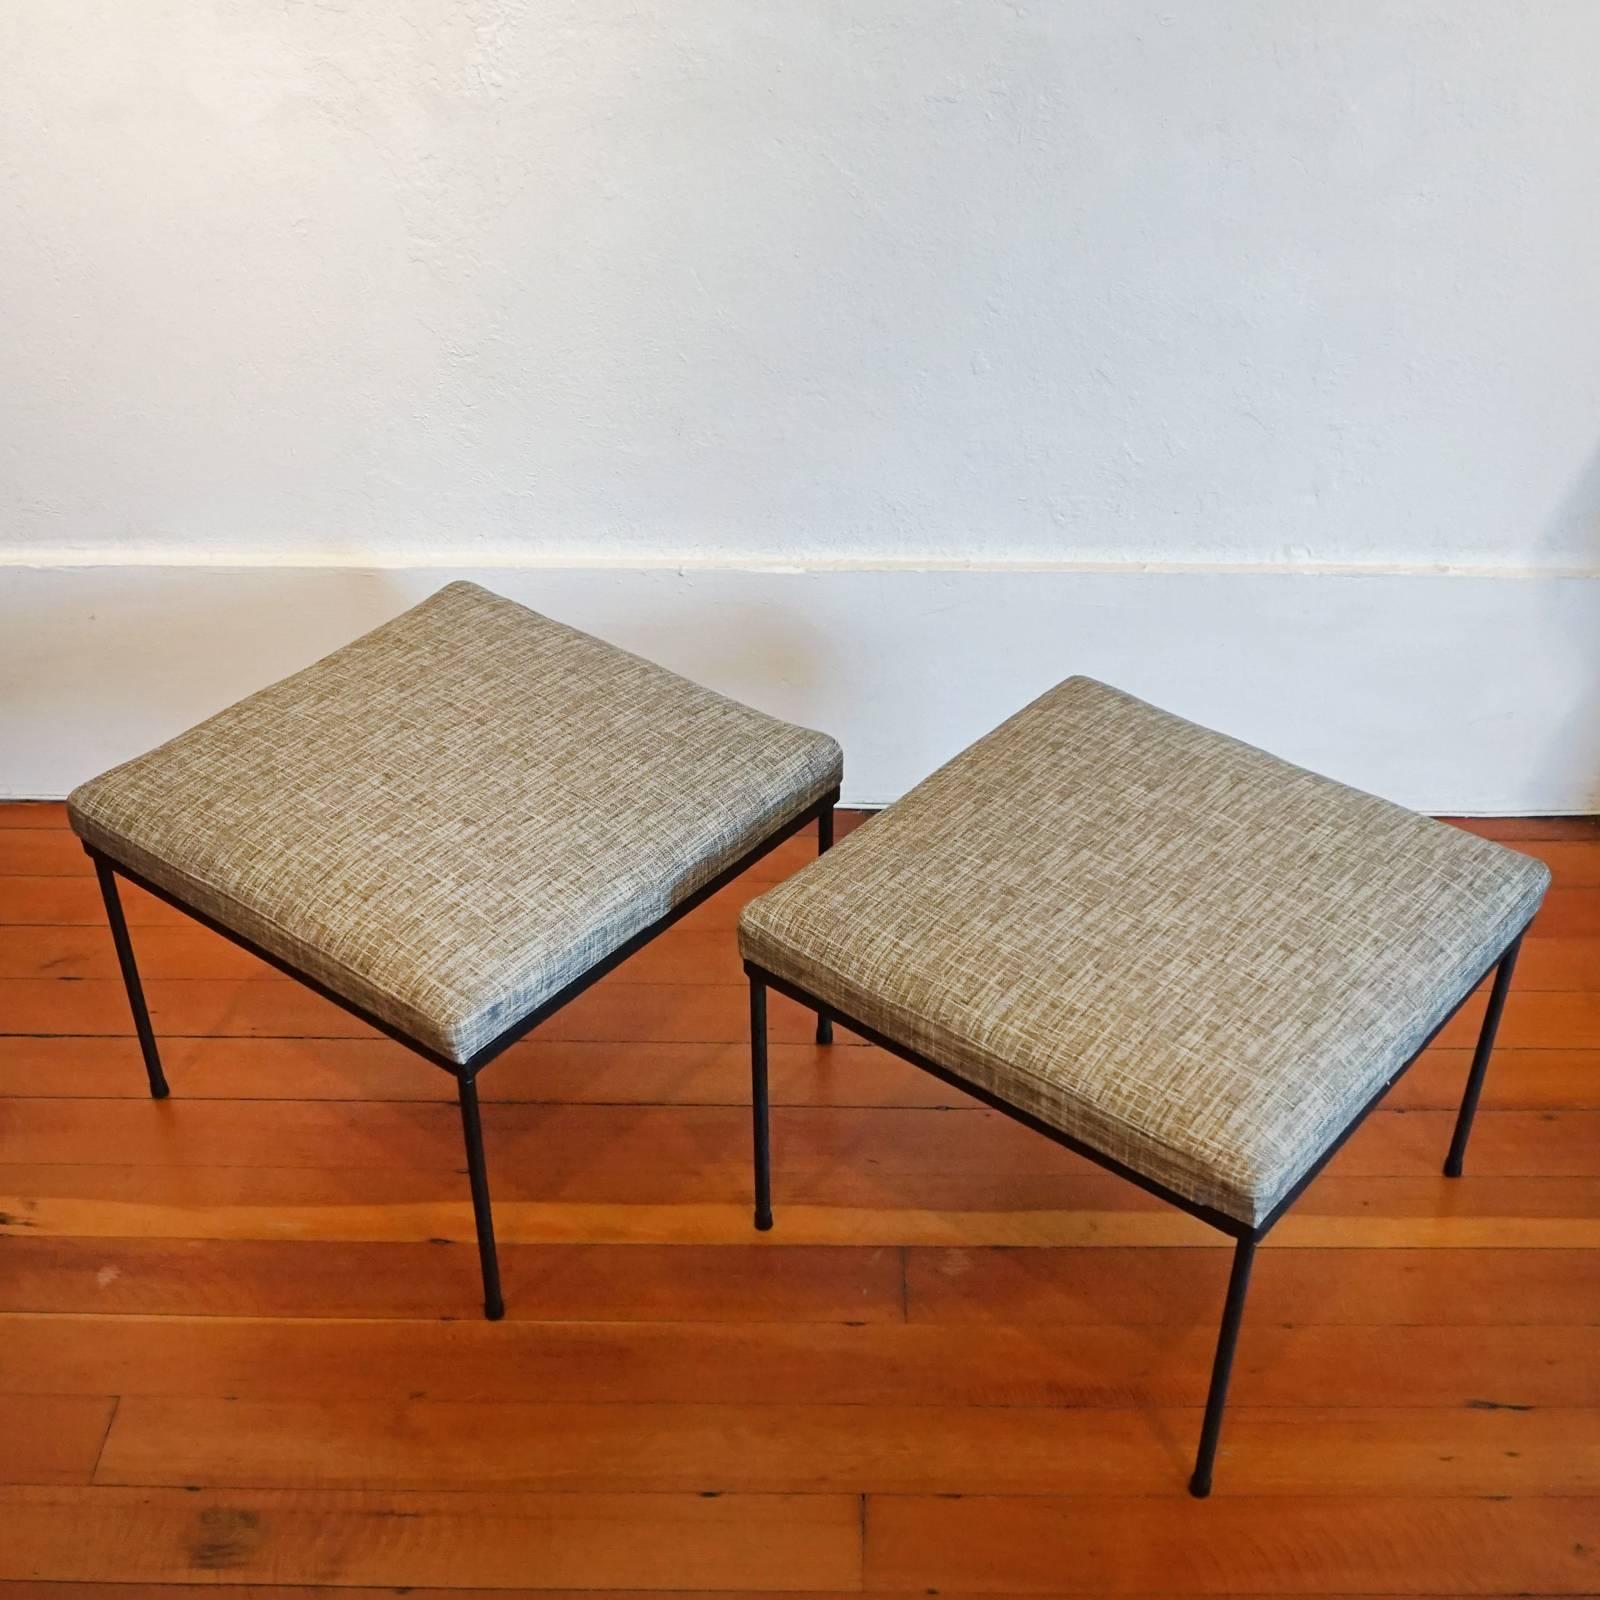 A pair of upholstered iron stools from the 1950s.